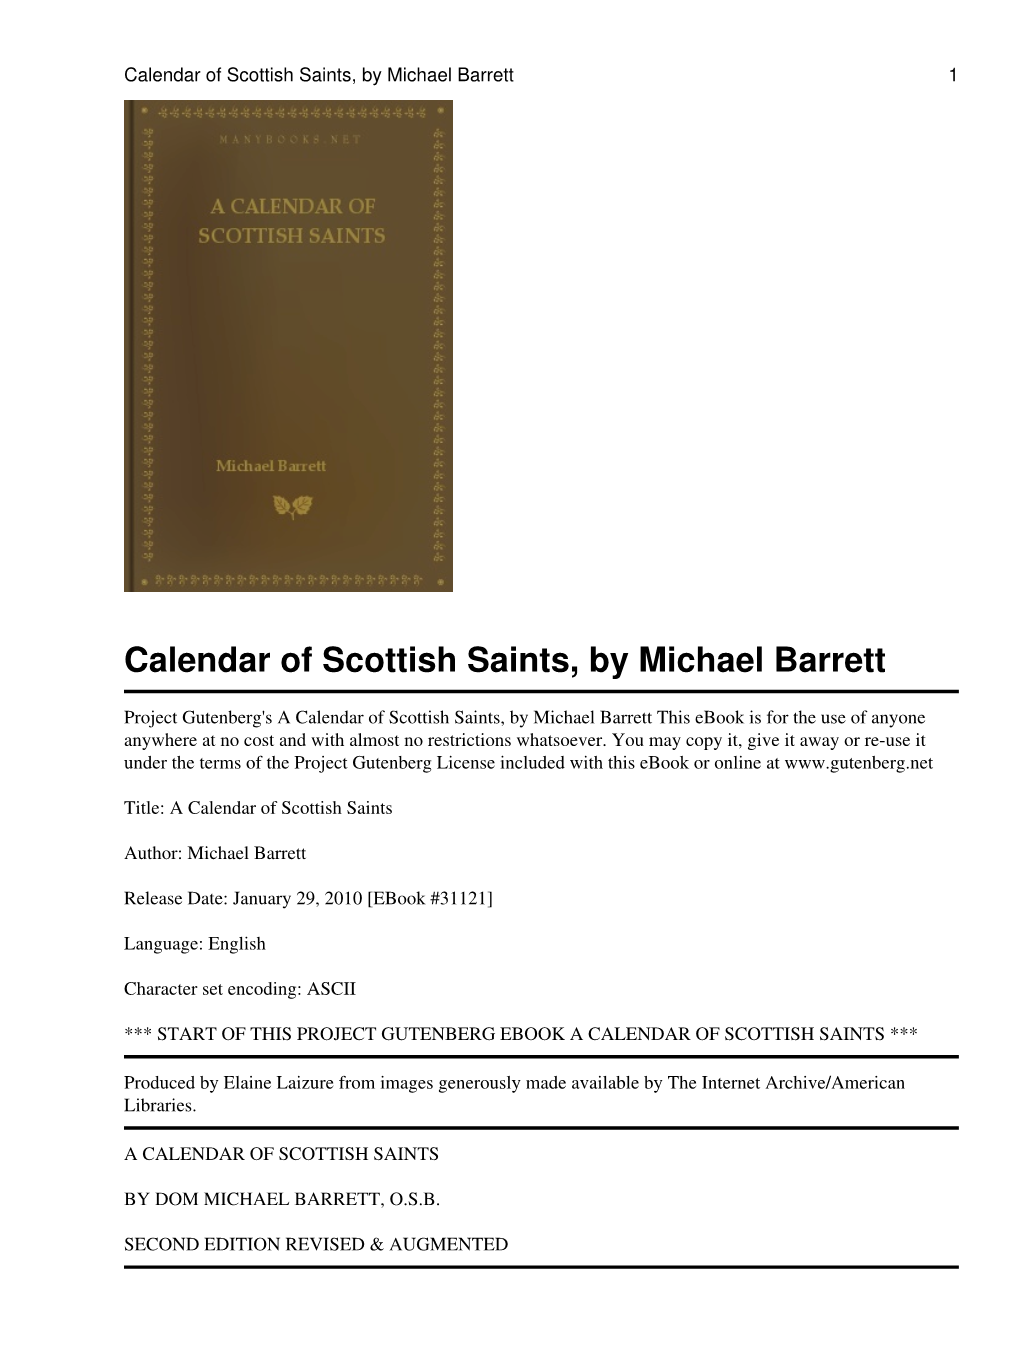 A Calendar of Scottish Saints, by Michael Barrett This Ebook Is for the Use of Anyone Anywhere at No Cost and with Almost No Restrictions Whatsoever